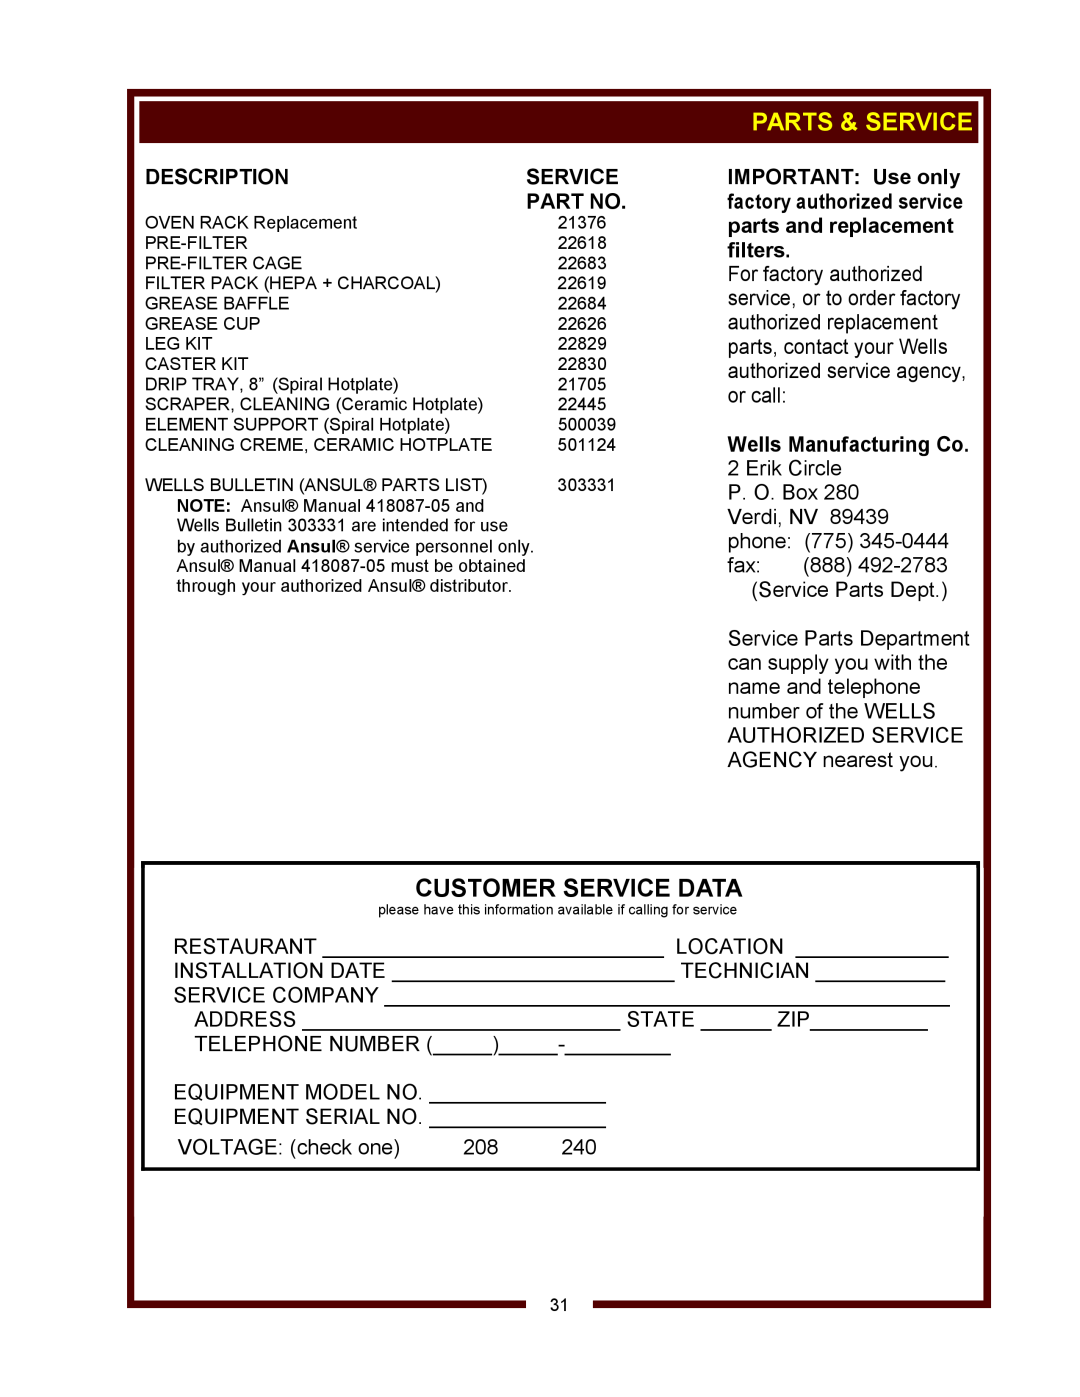 Bloomfield WVOC-2HFG, WVOC-2HSG operation manual Customer Service Data, Description, Wells Manufacturing Co, Parts & Service 